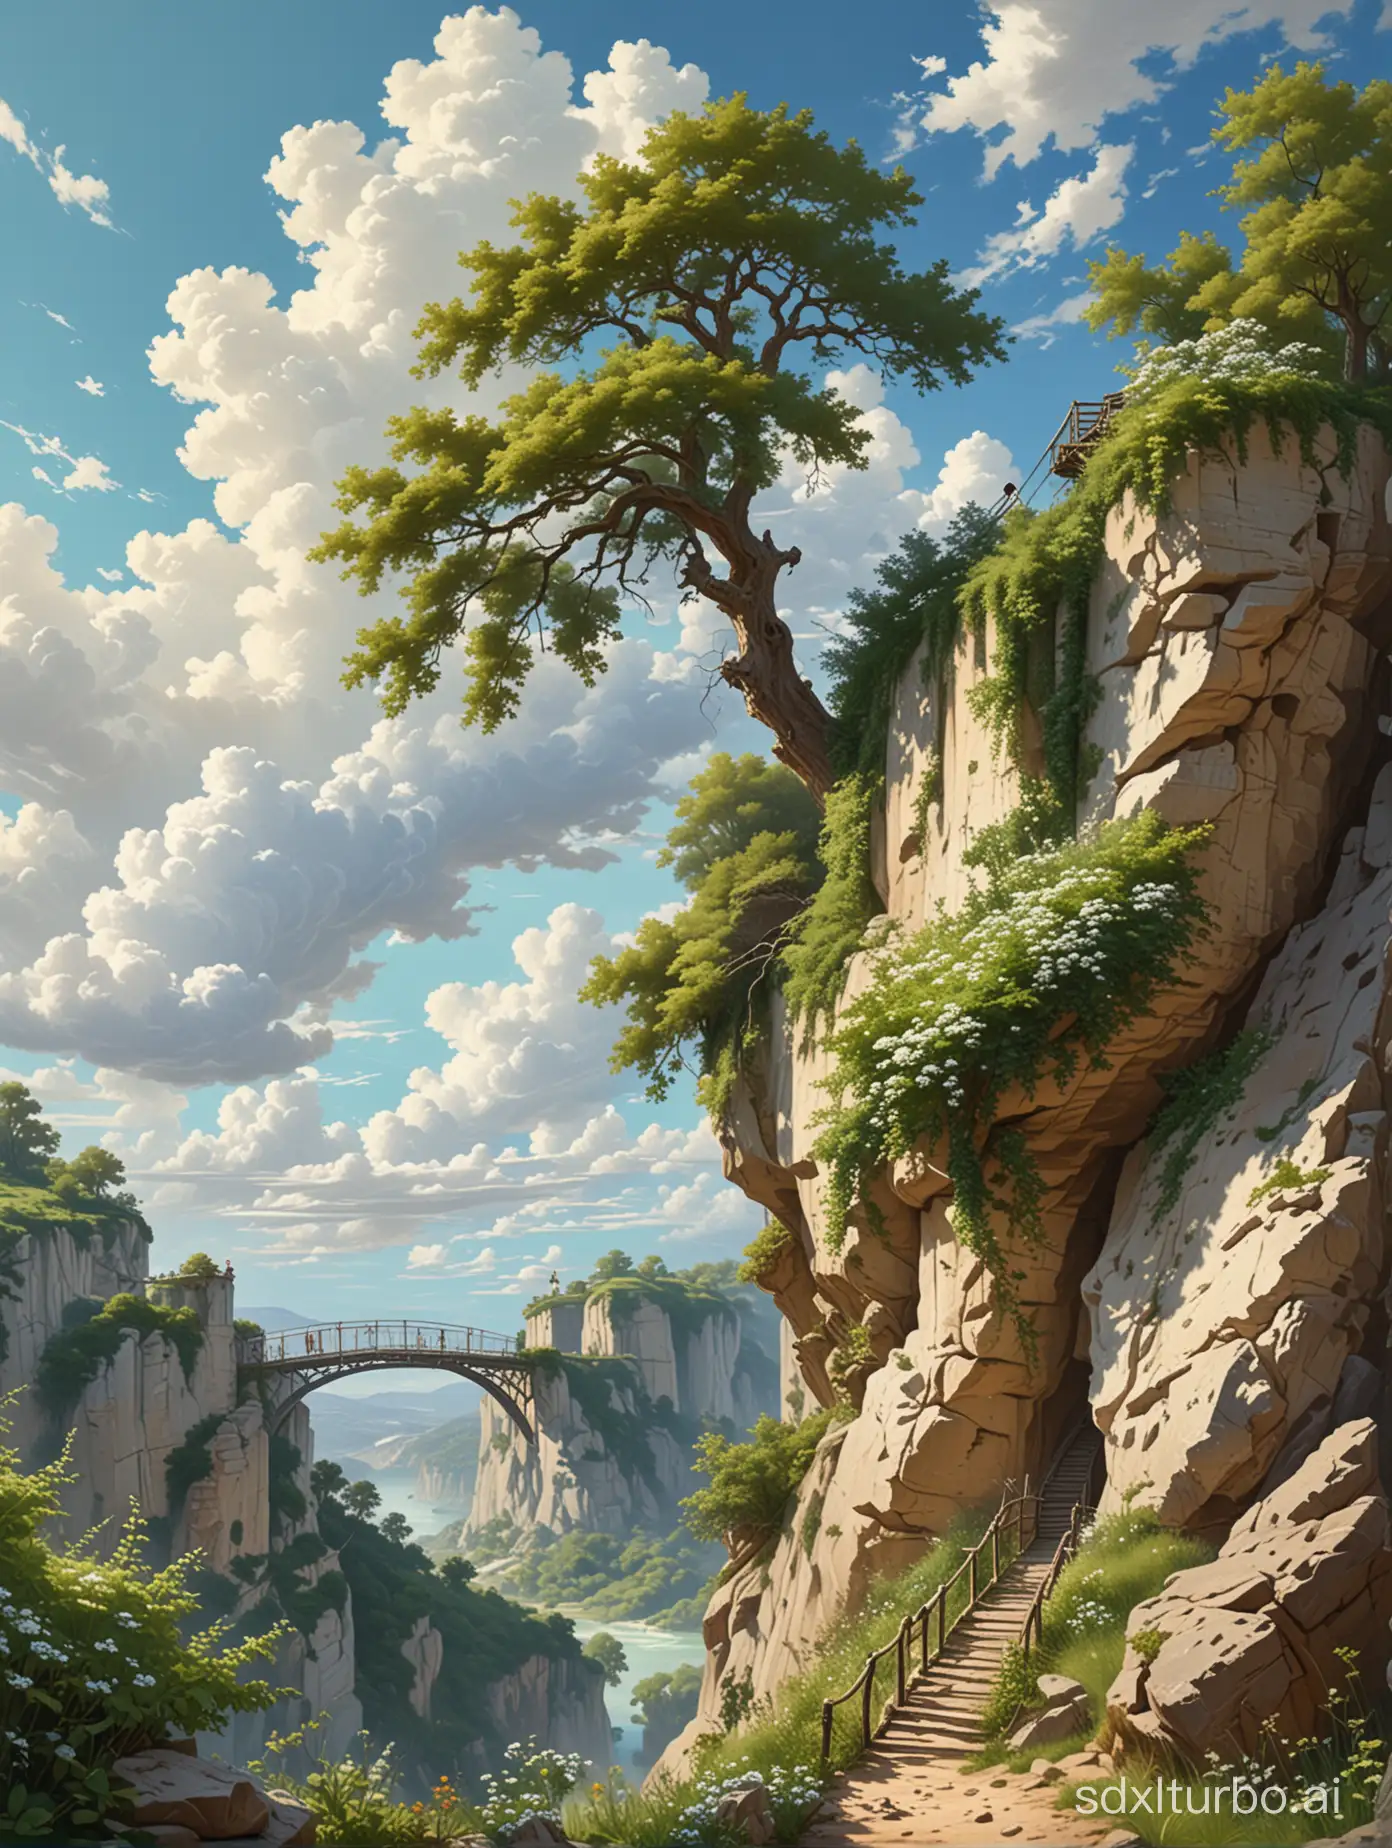 Ultrarealistic-Painting-of-a-High-Cliff-with-Oak-Tree-and-Hanging-Bridge